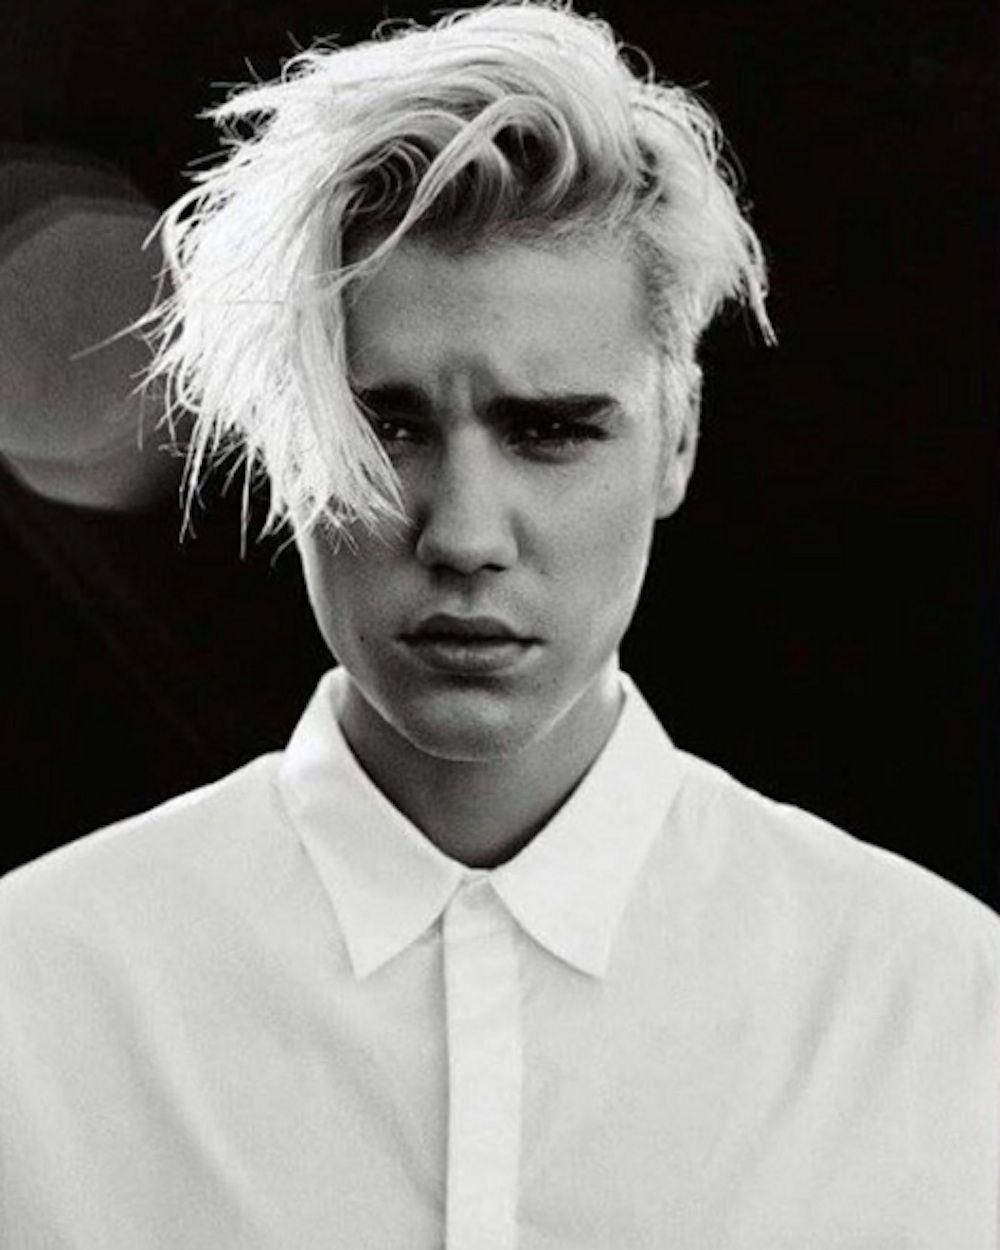 Justin Bieber Just Released An Album, And It's Moody AF